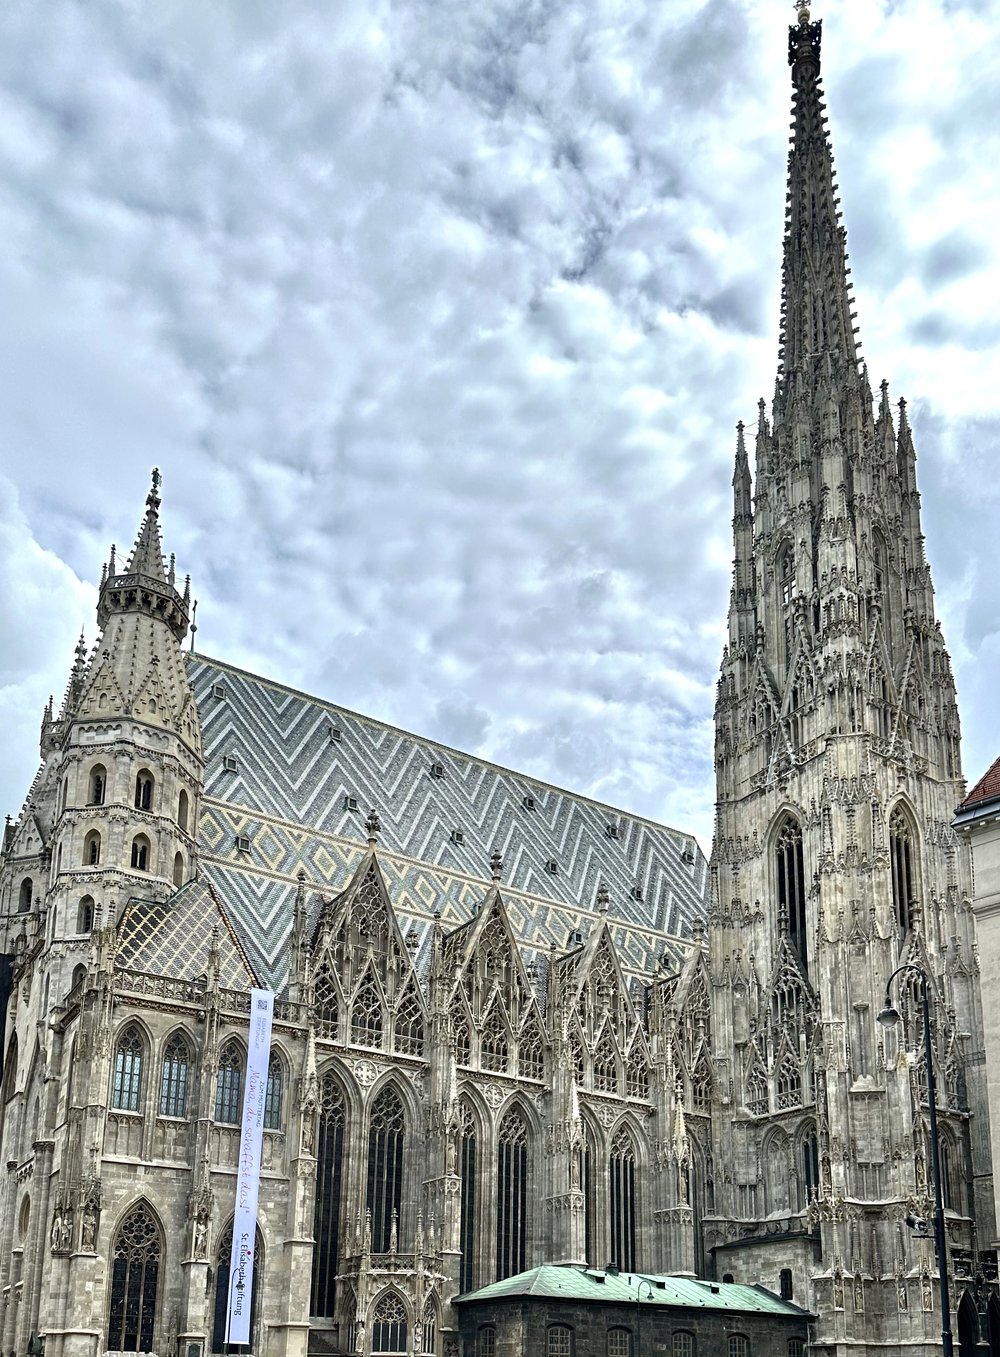 St. Stephens cathedral